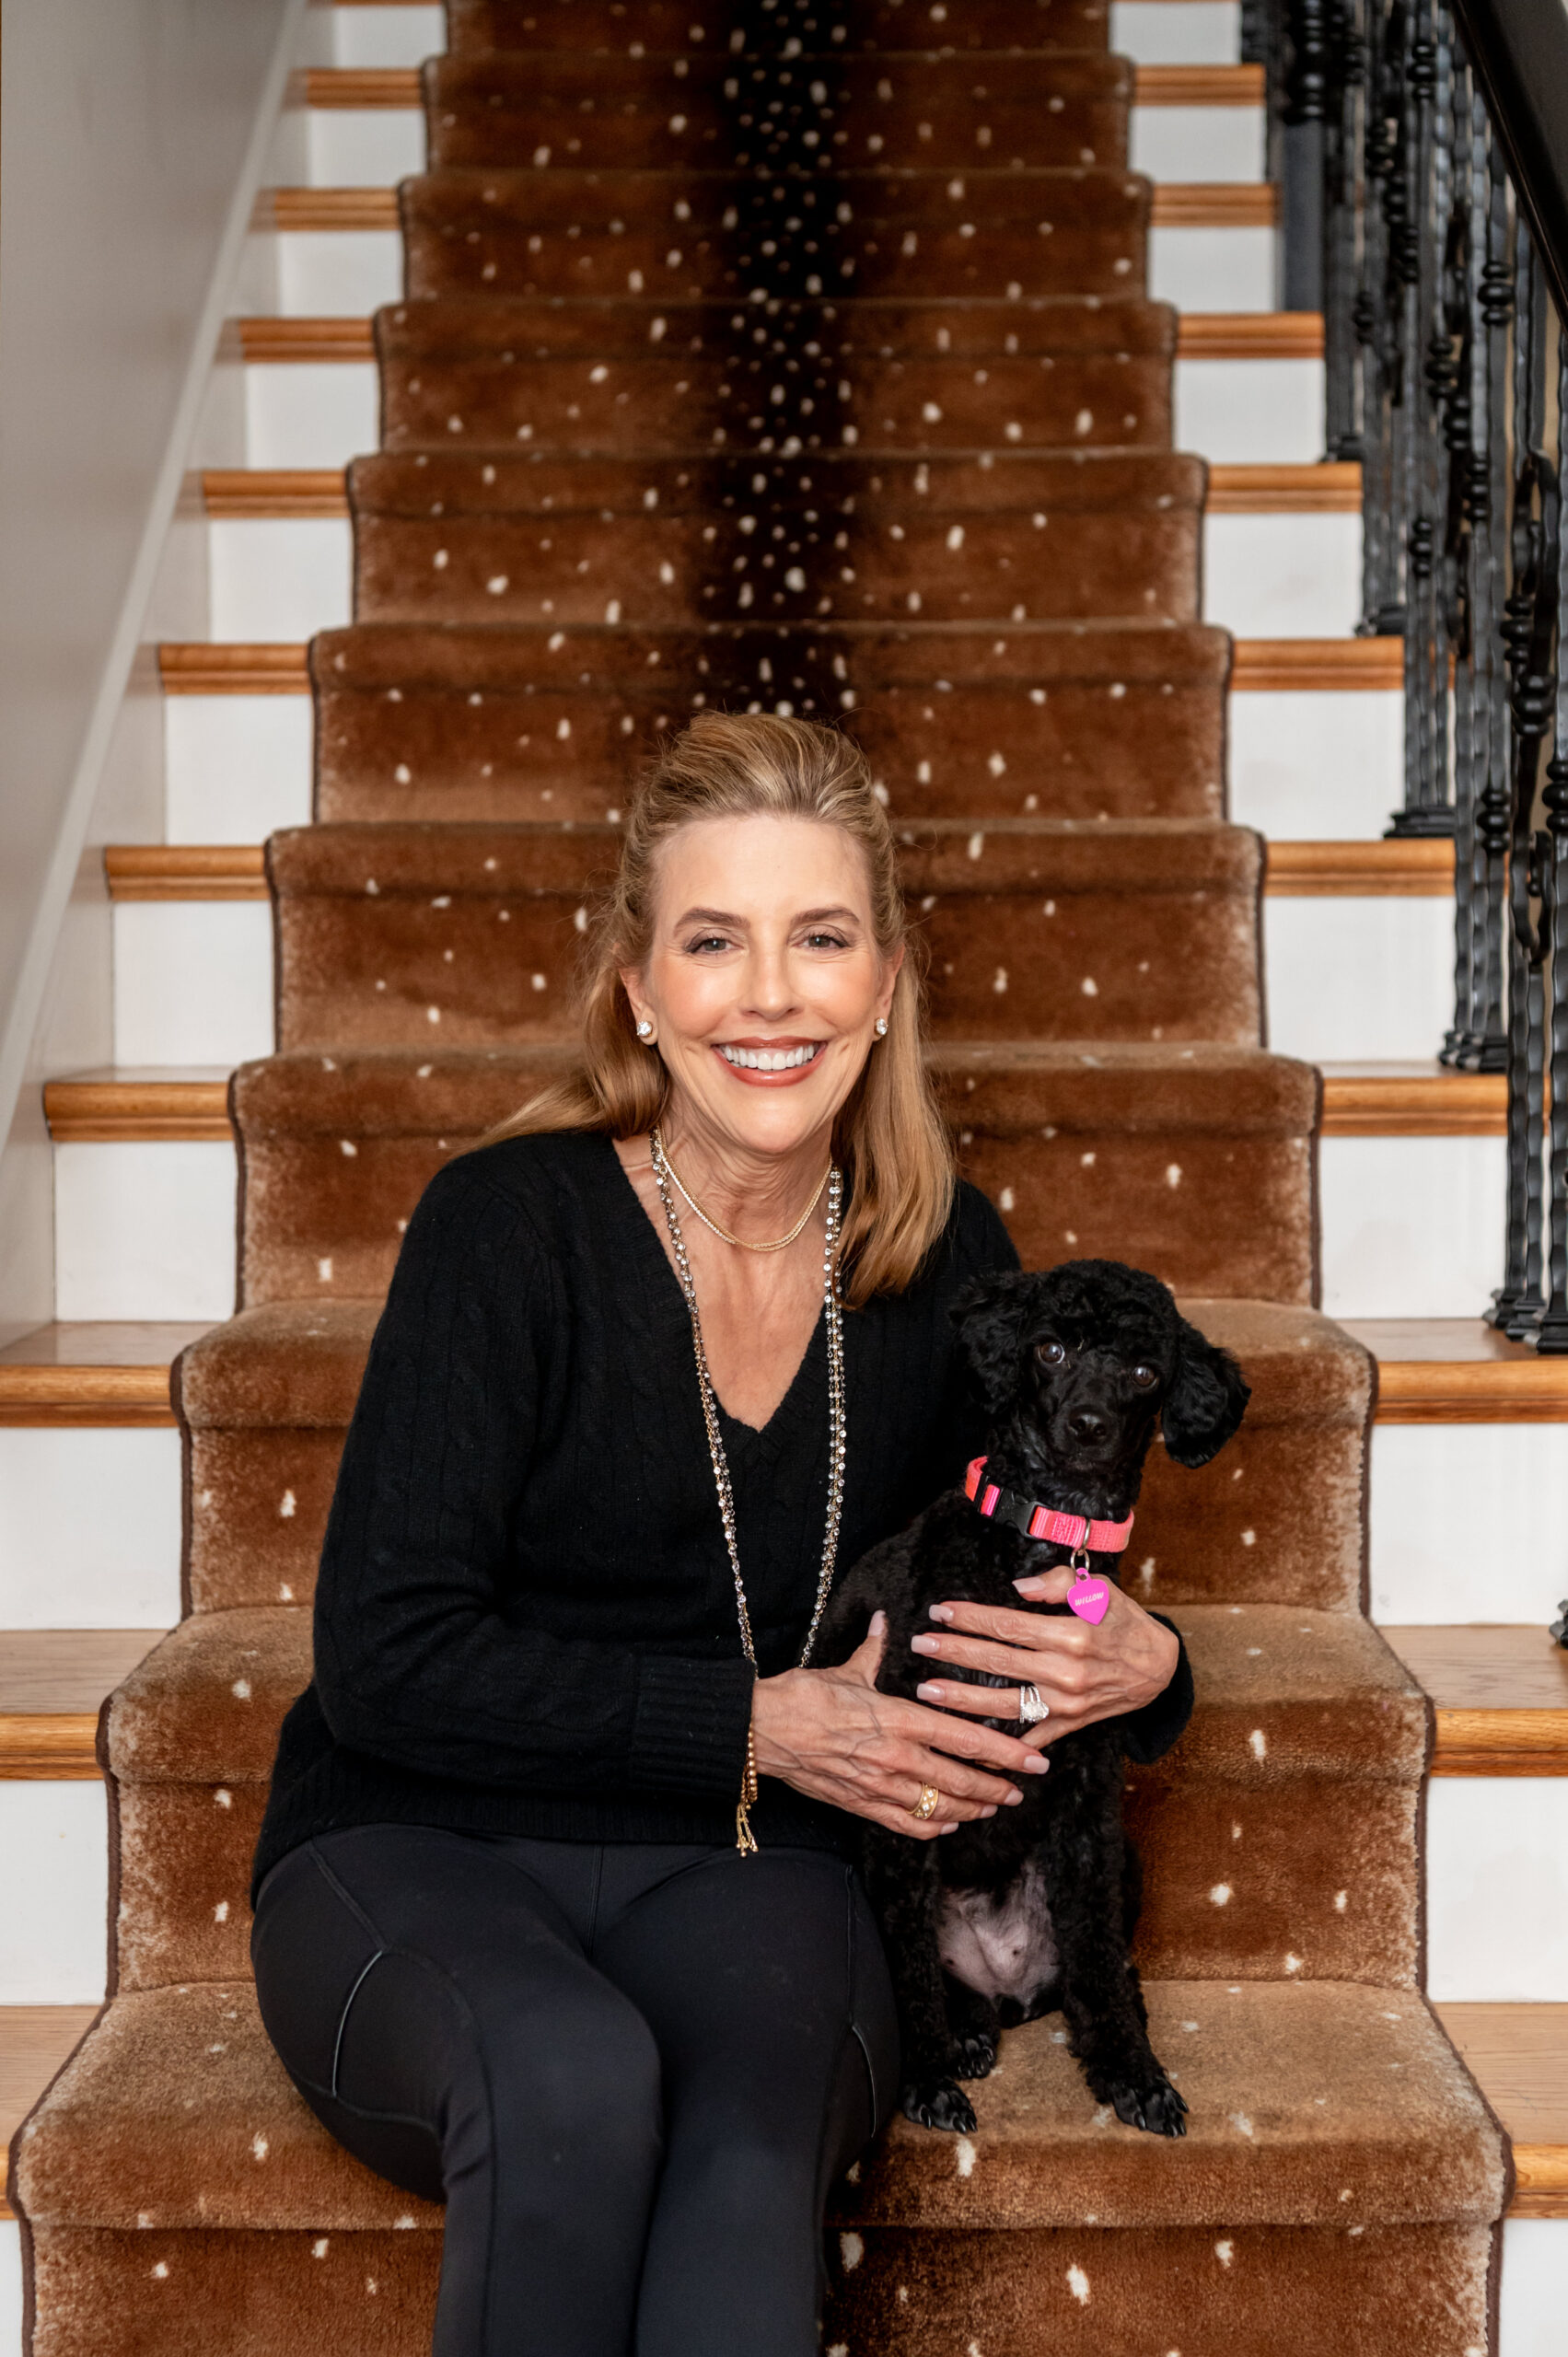 A women interior designer smiling holding her dog on a staircase for her interior design brand shoot